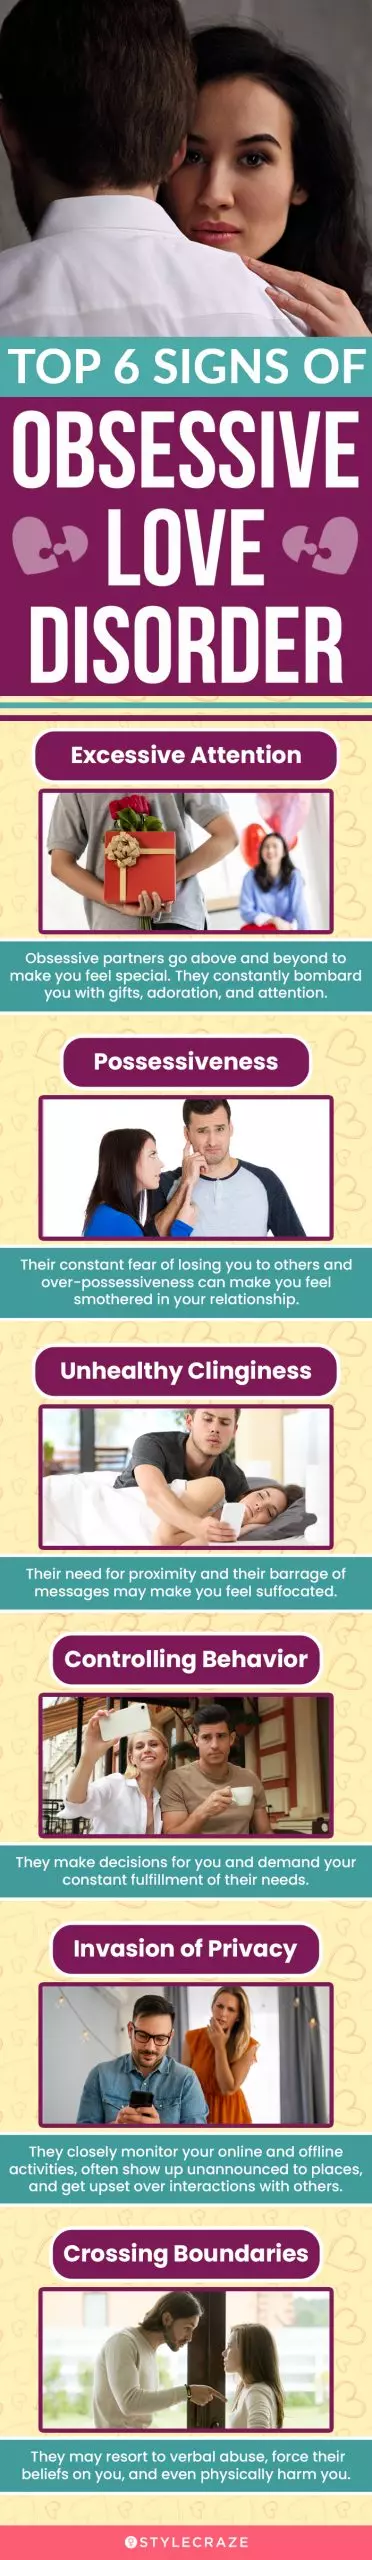 top 6 signs of obsessive love disorder (infographic)